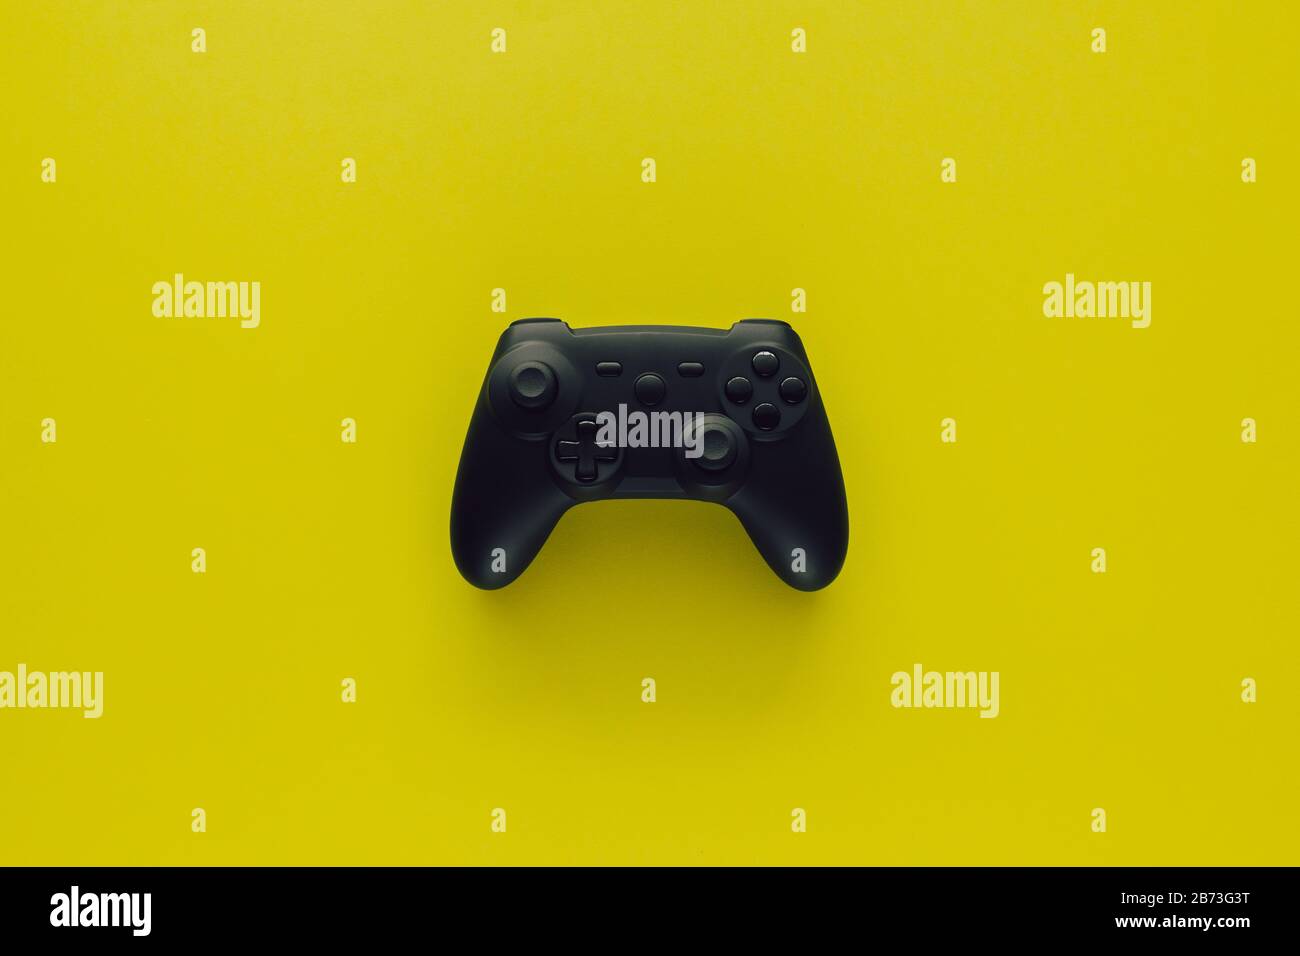 Stock photo of a black gamepad in the middle of a green background Stock Photo